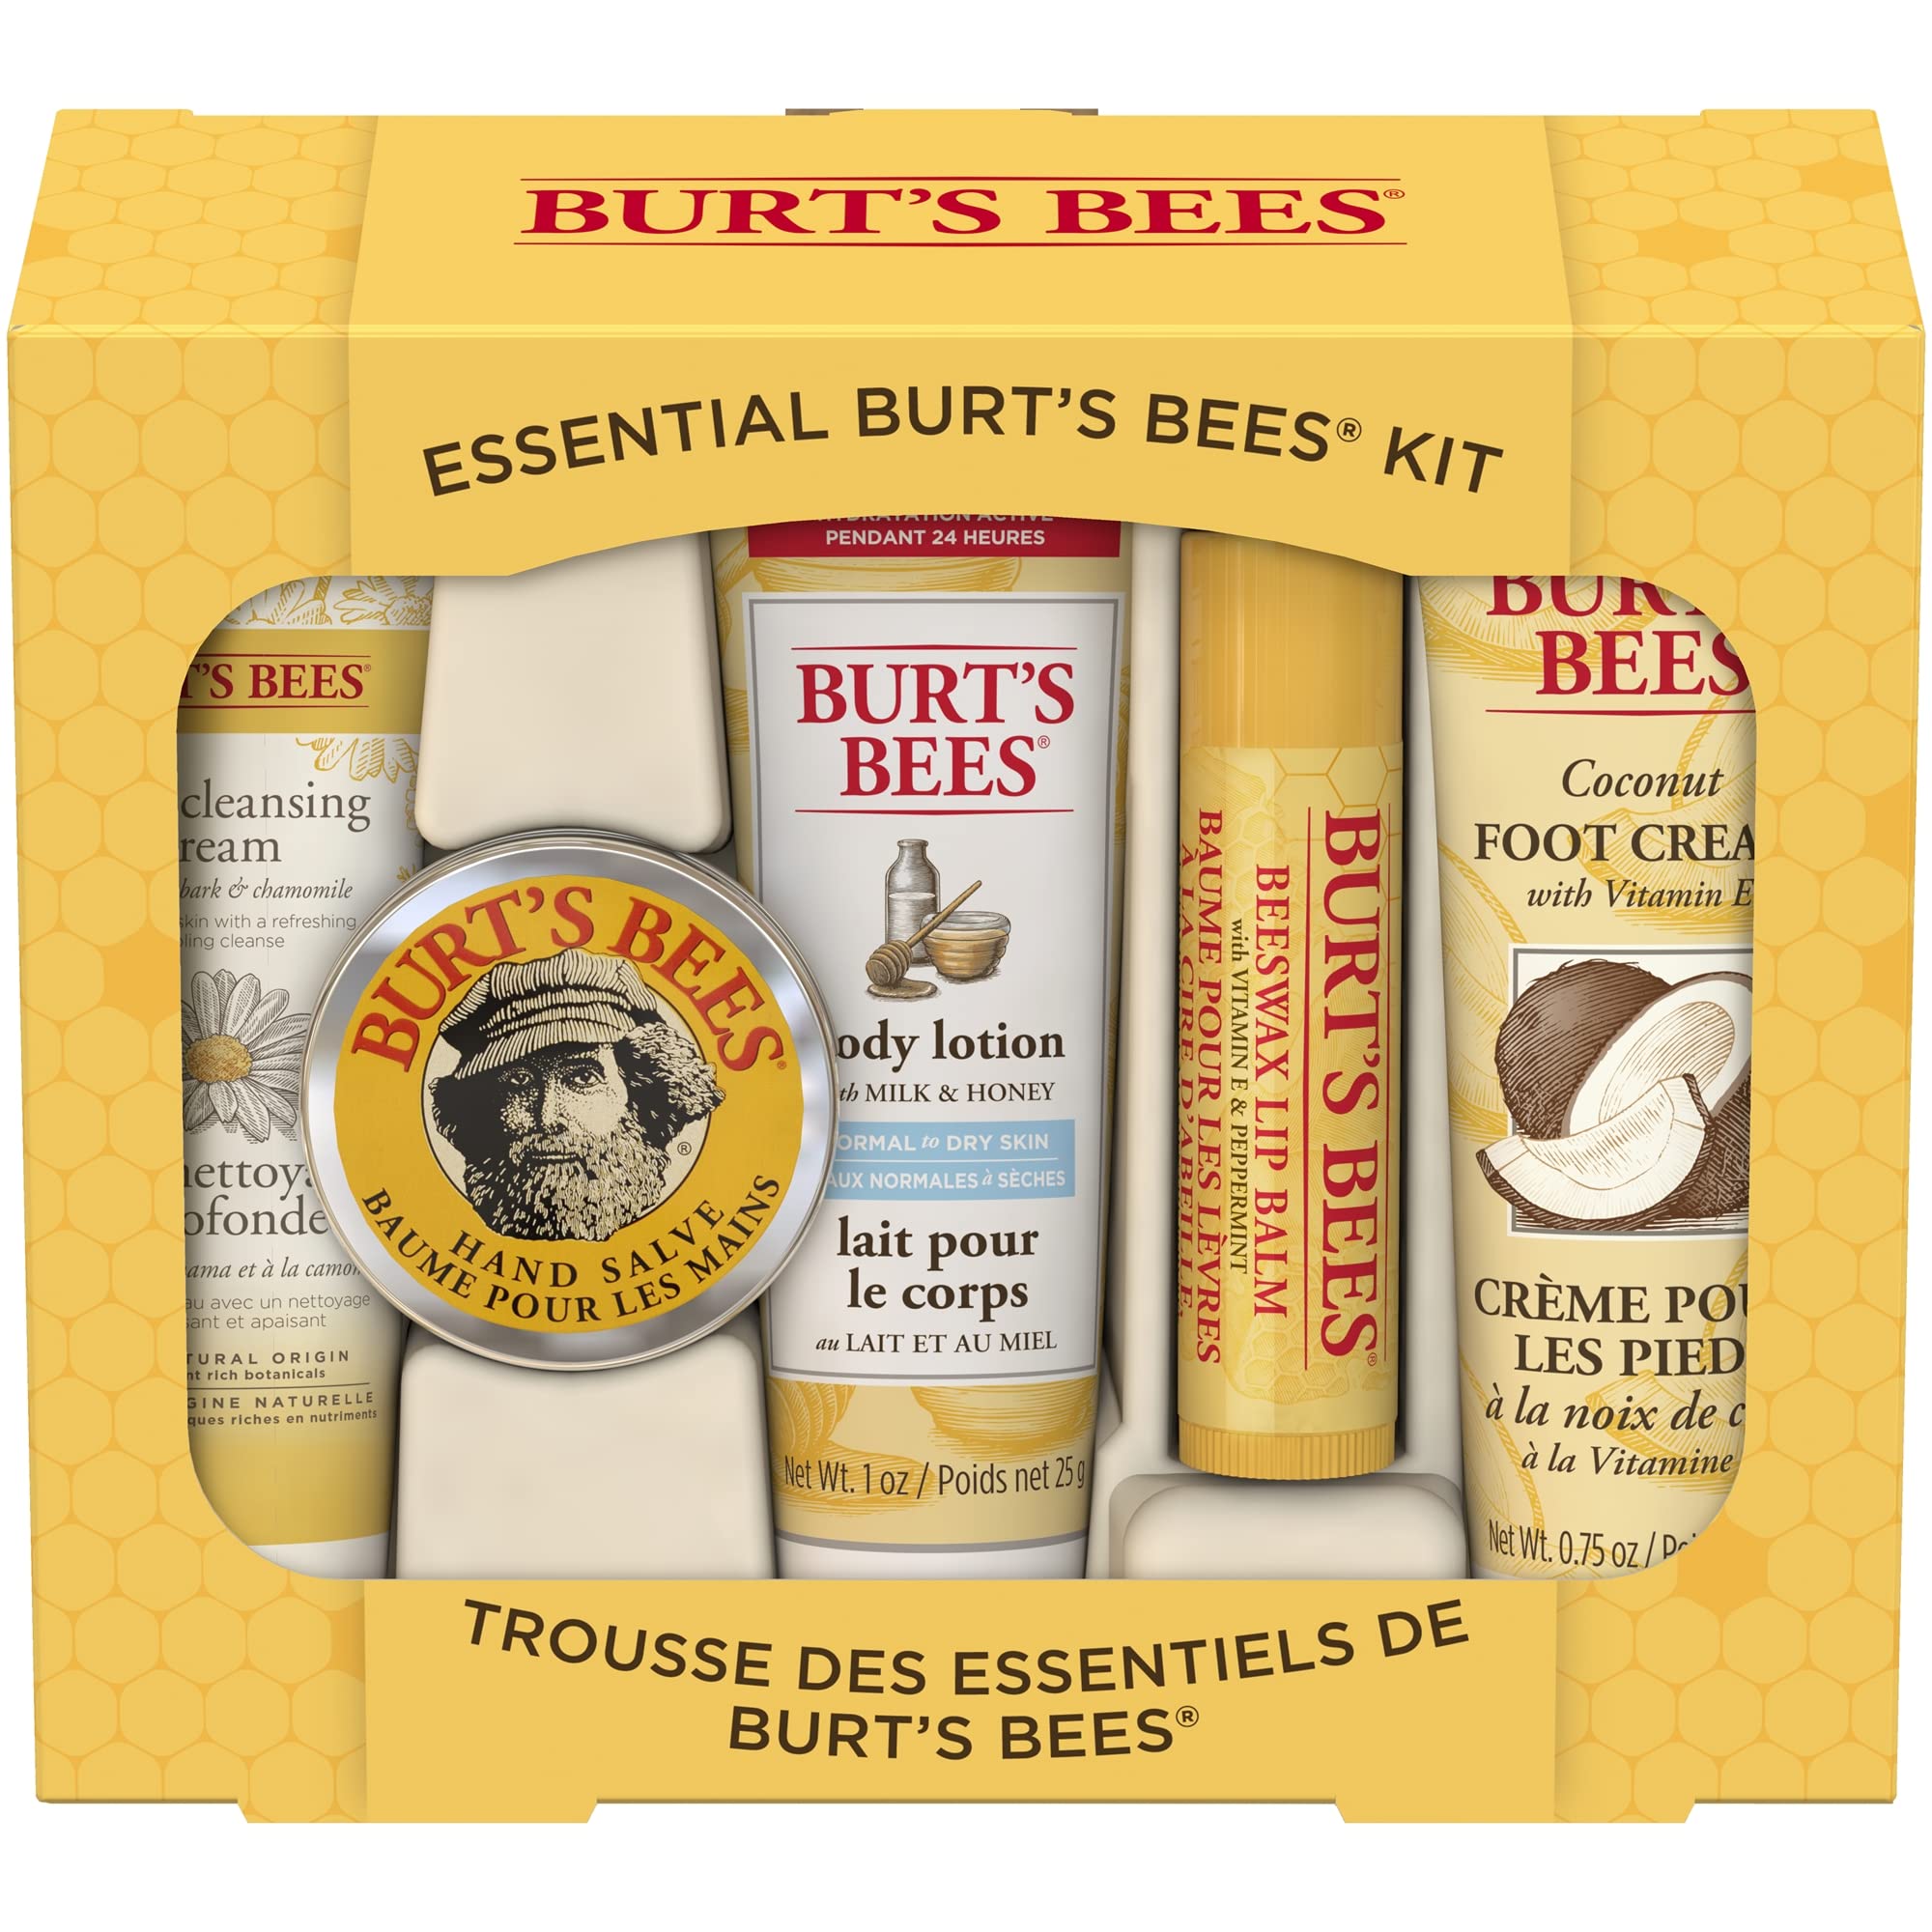 Burt's Bees Gifts Ideas, 5 Body Care Products, Everyday Essentials Set - Beeswax Lip Balm, Deep Cleansing Cream, Hand Salve, Body Lotion & Foot Cream, Travel Size